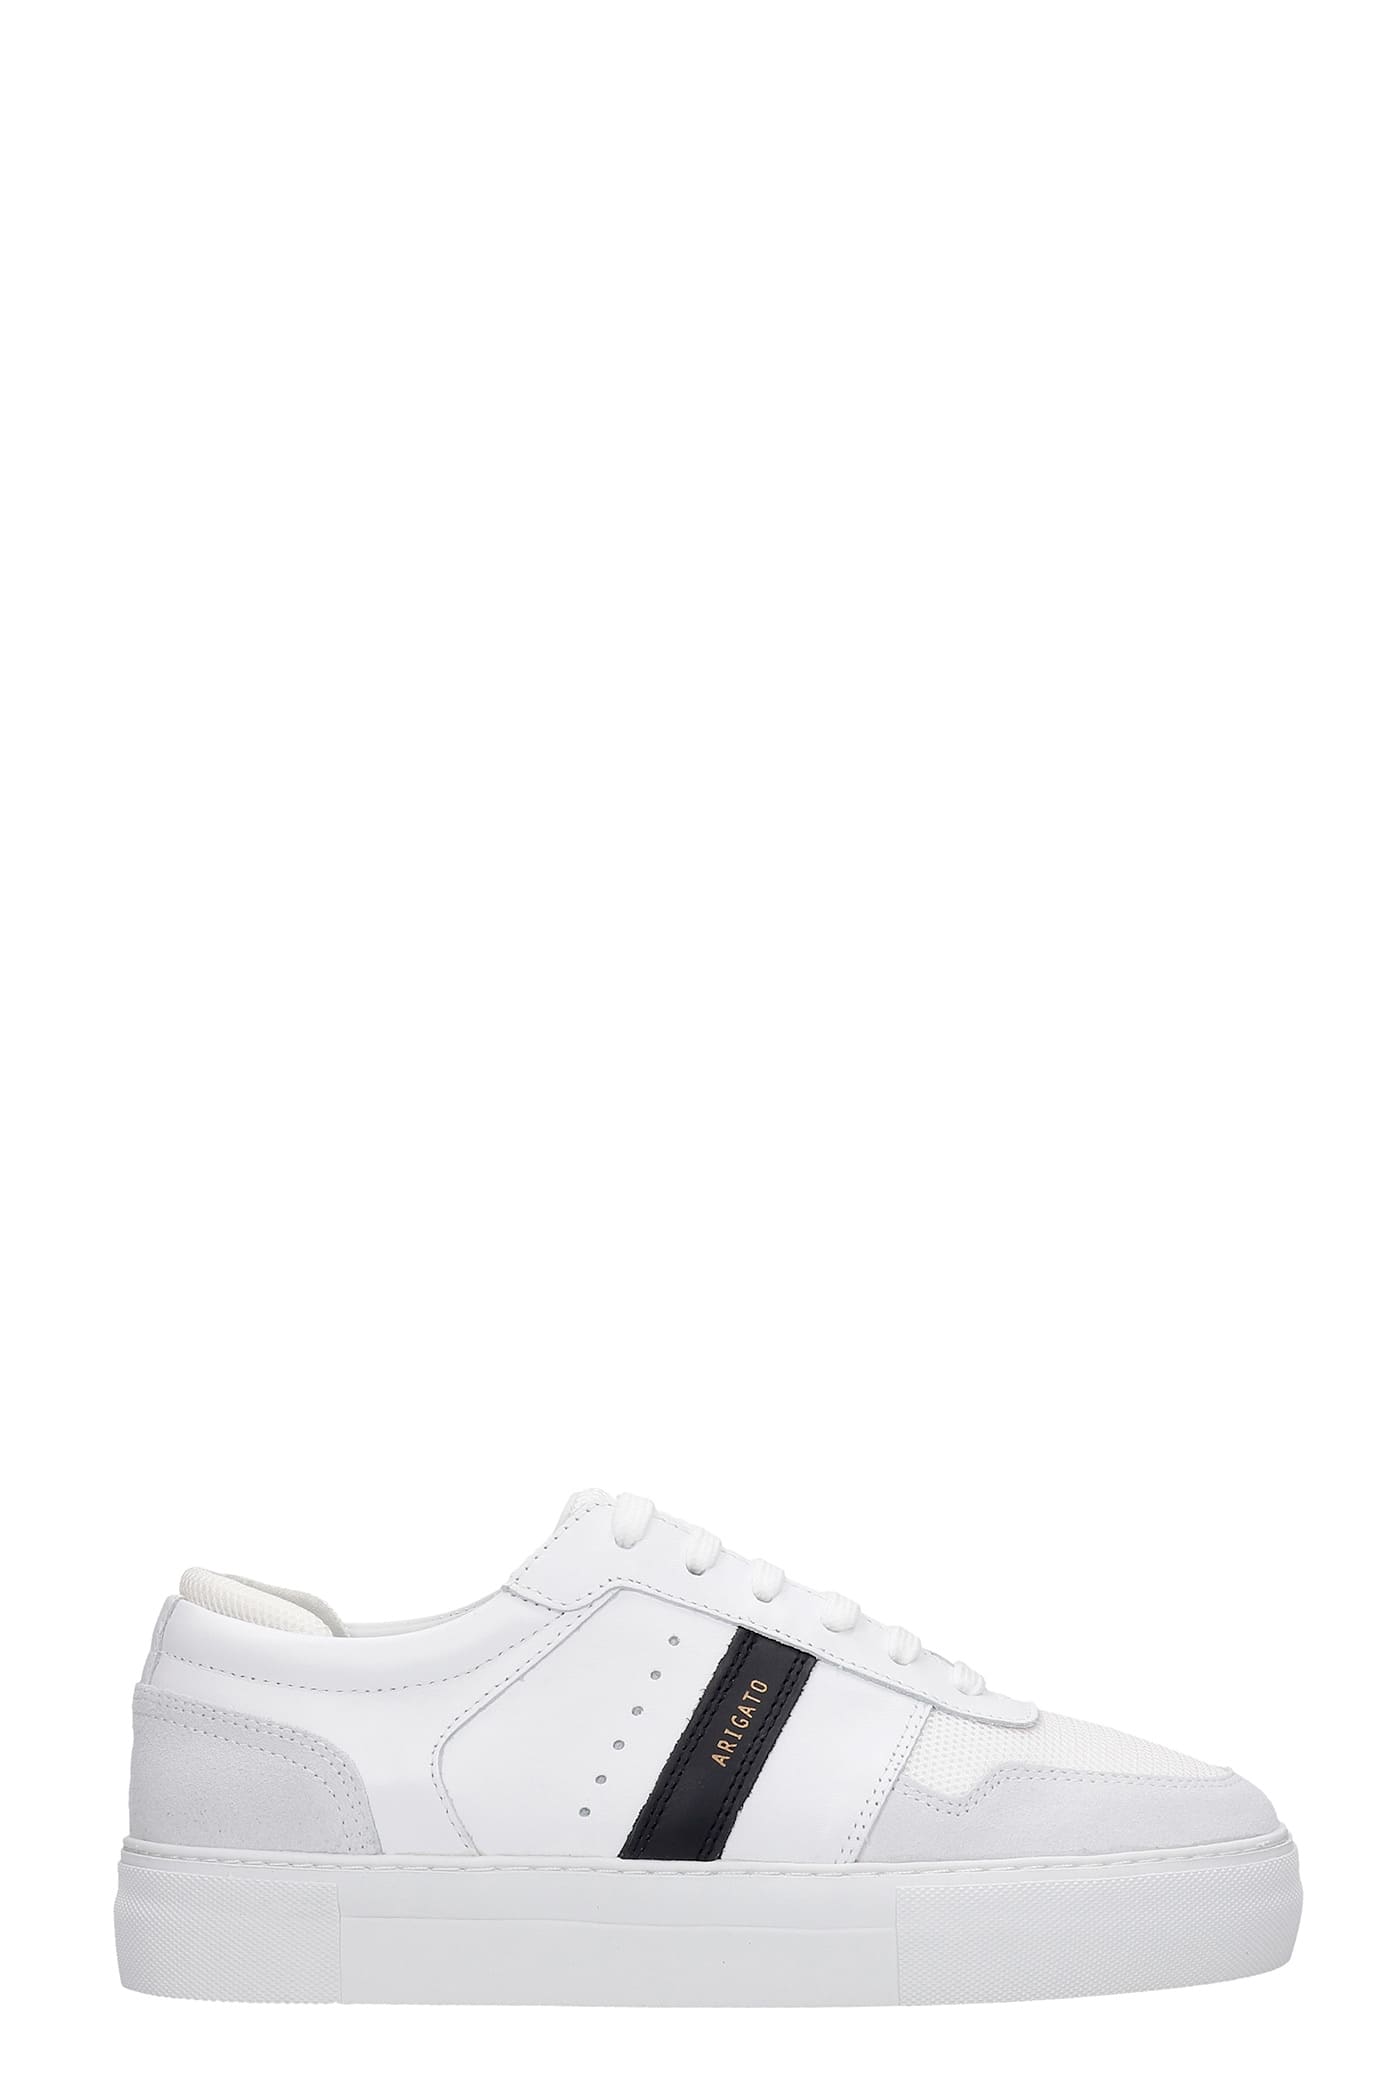 Axel Arigato Detailed Platfo Sneakers In White Leather